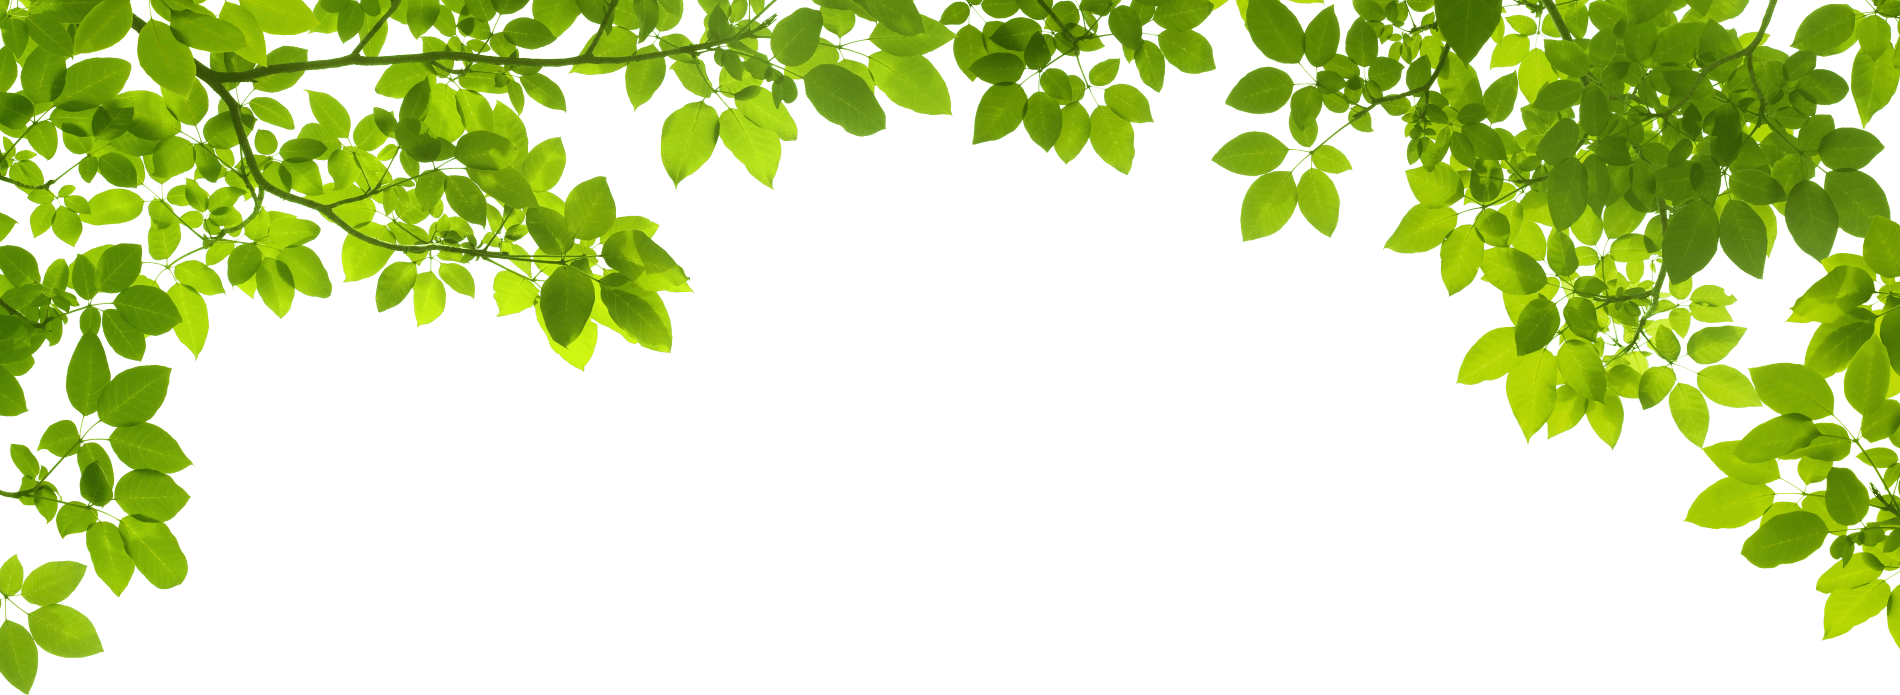 Download Green Leaf Border Png PNG Image with No Background - PNGkey.com